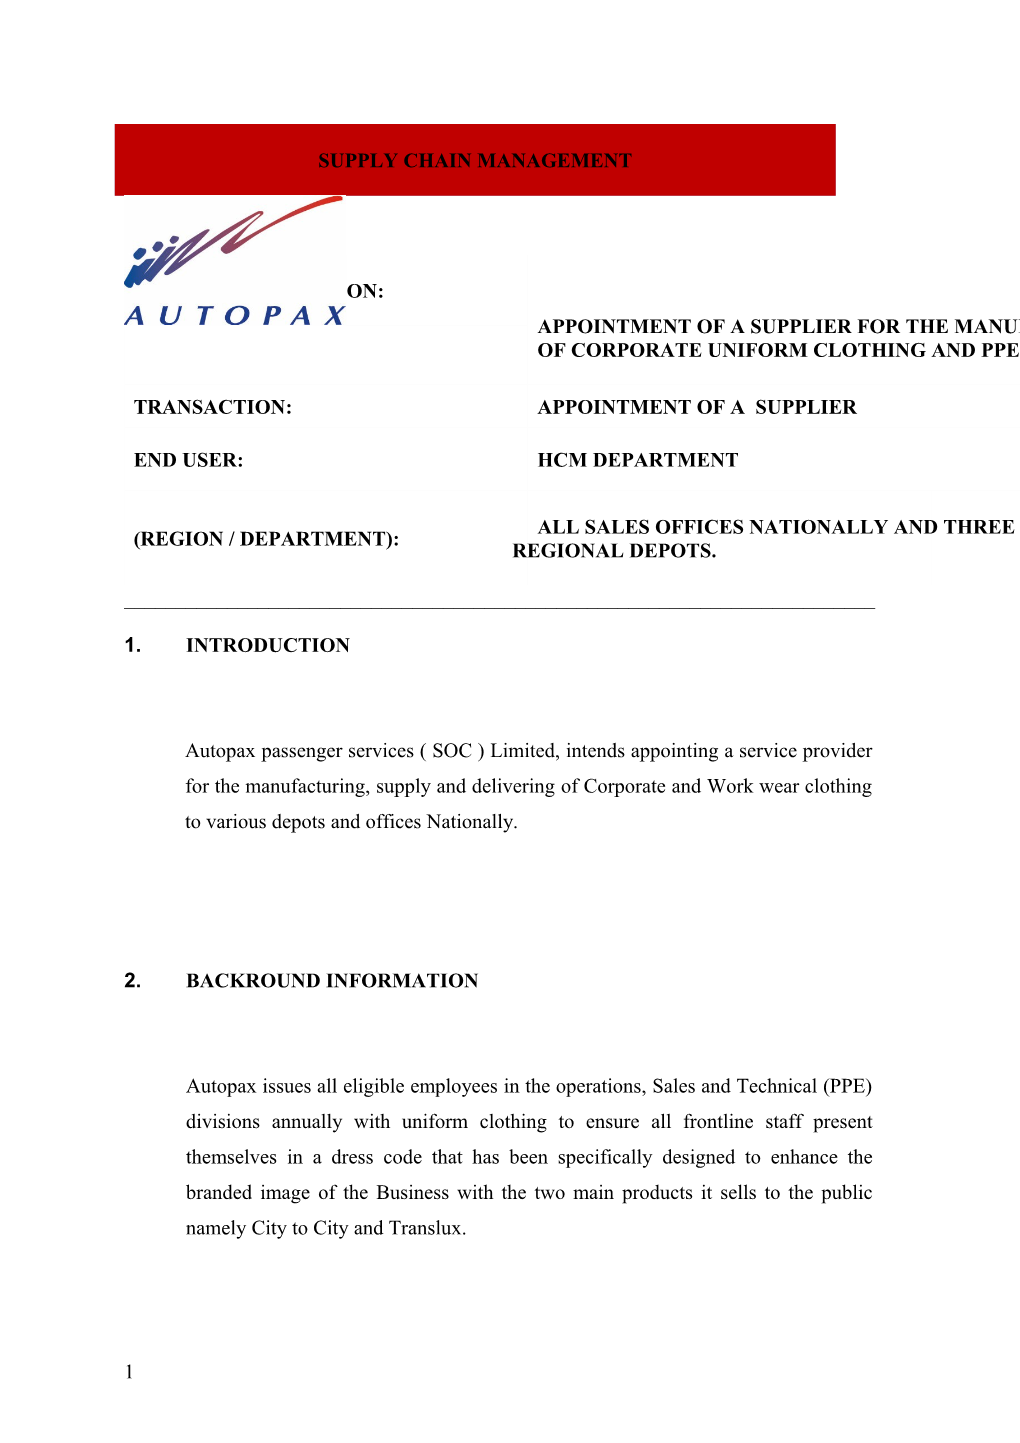 Autopax Passenger Services ( SOC ) Limited, Intends Appointing a Service Provider for The